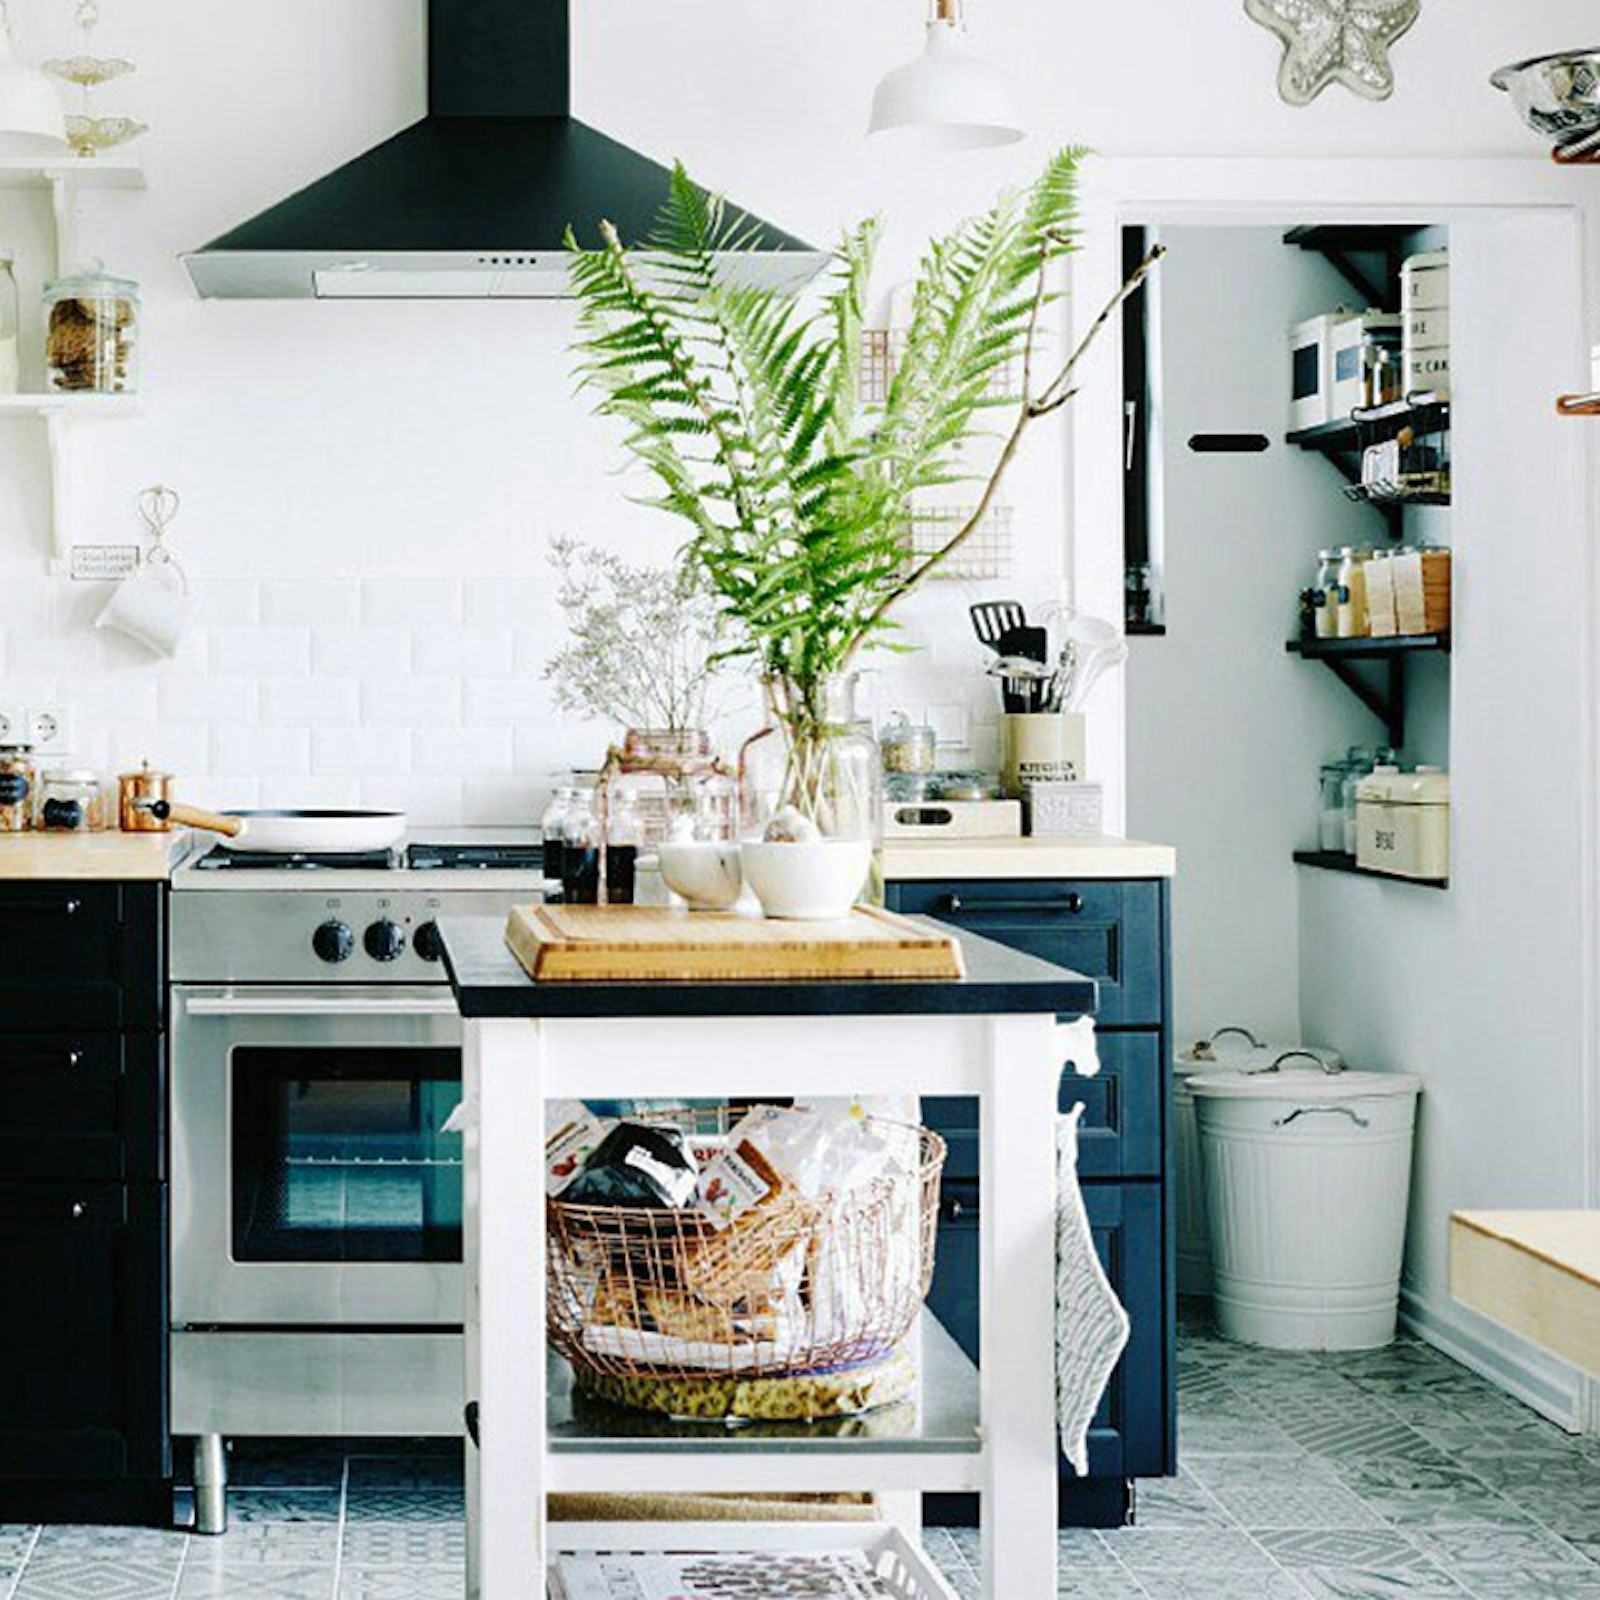 These Ikea Kitchen Hacks Are Equal Parts Stylish And Practical